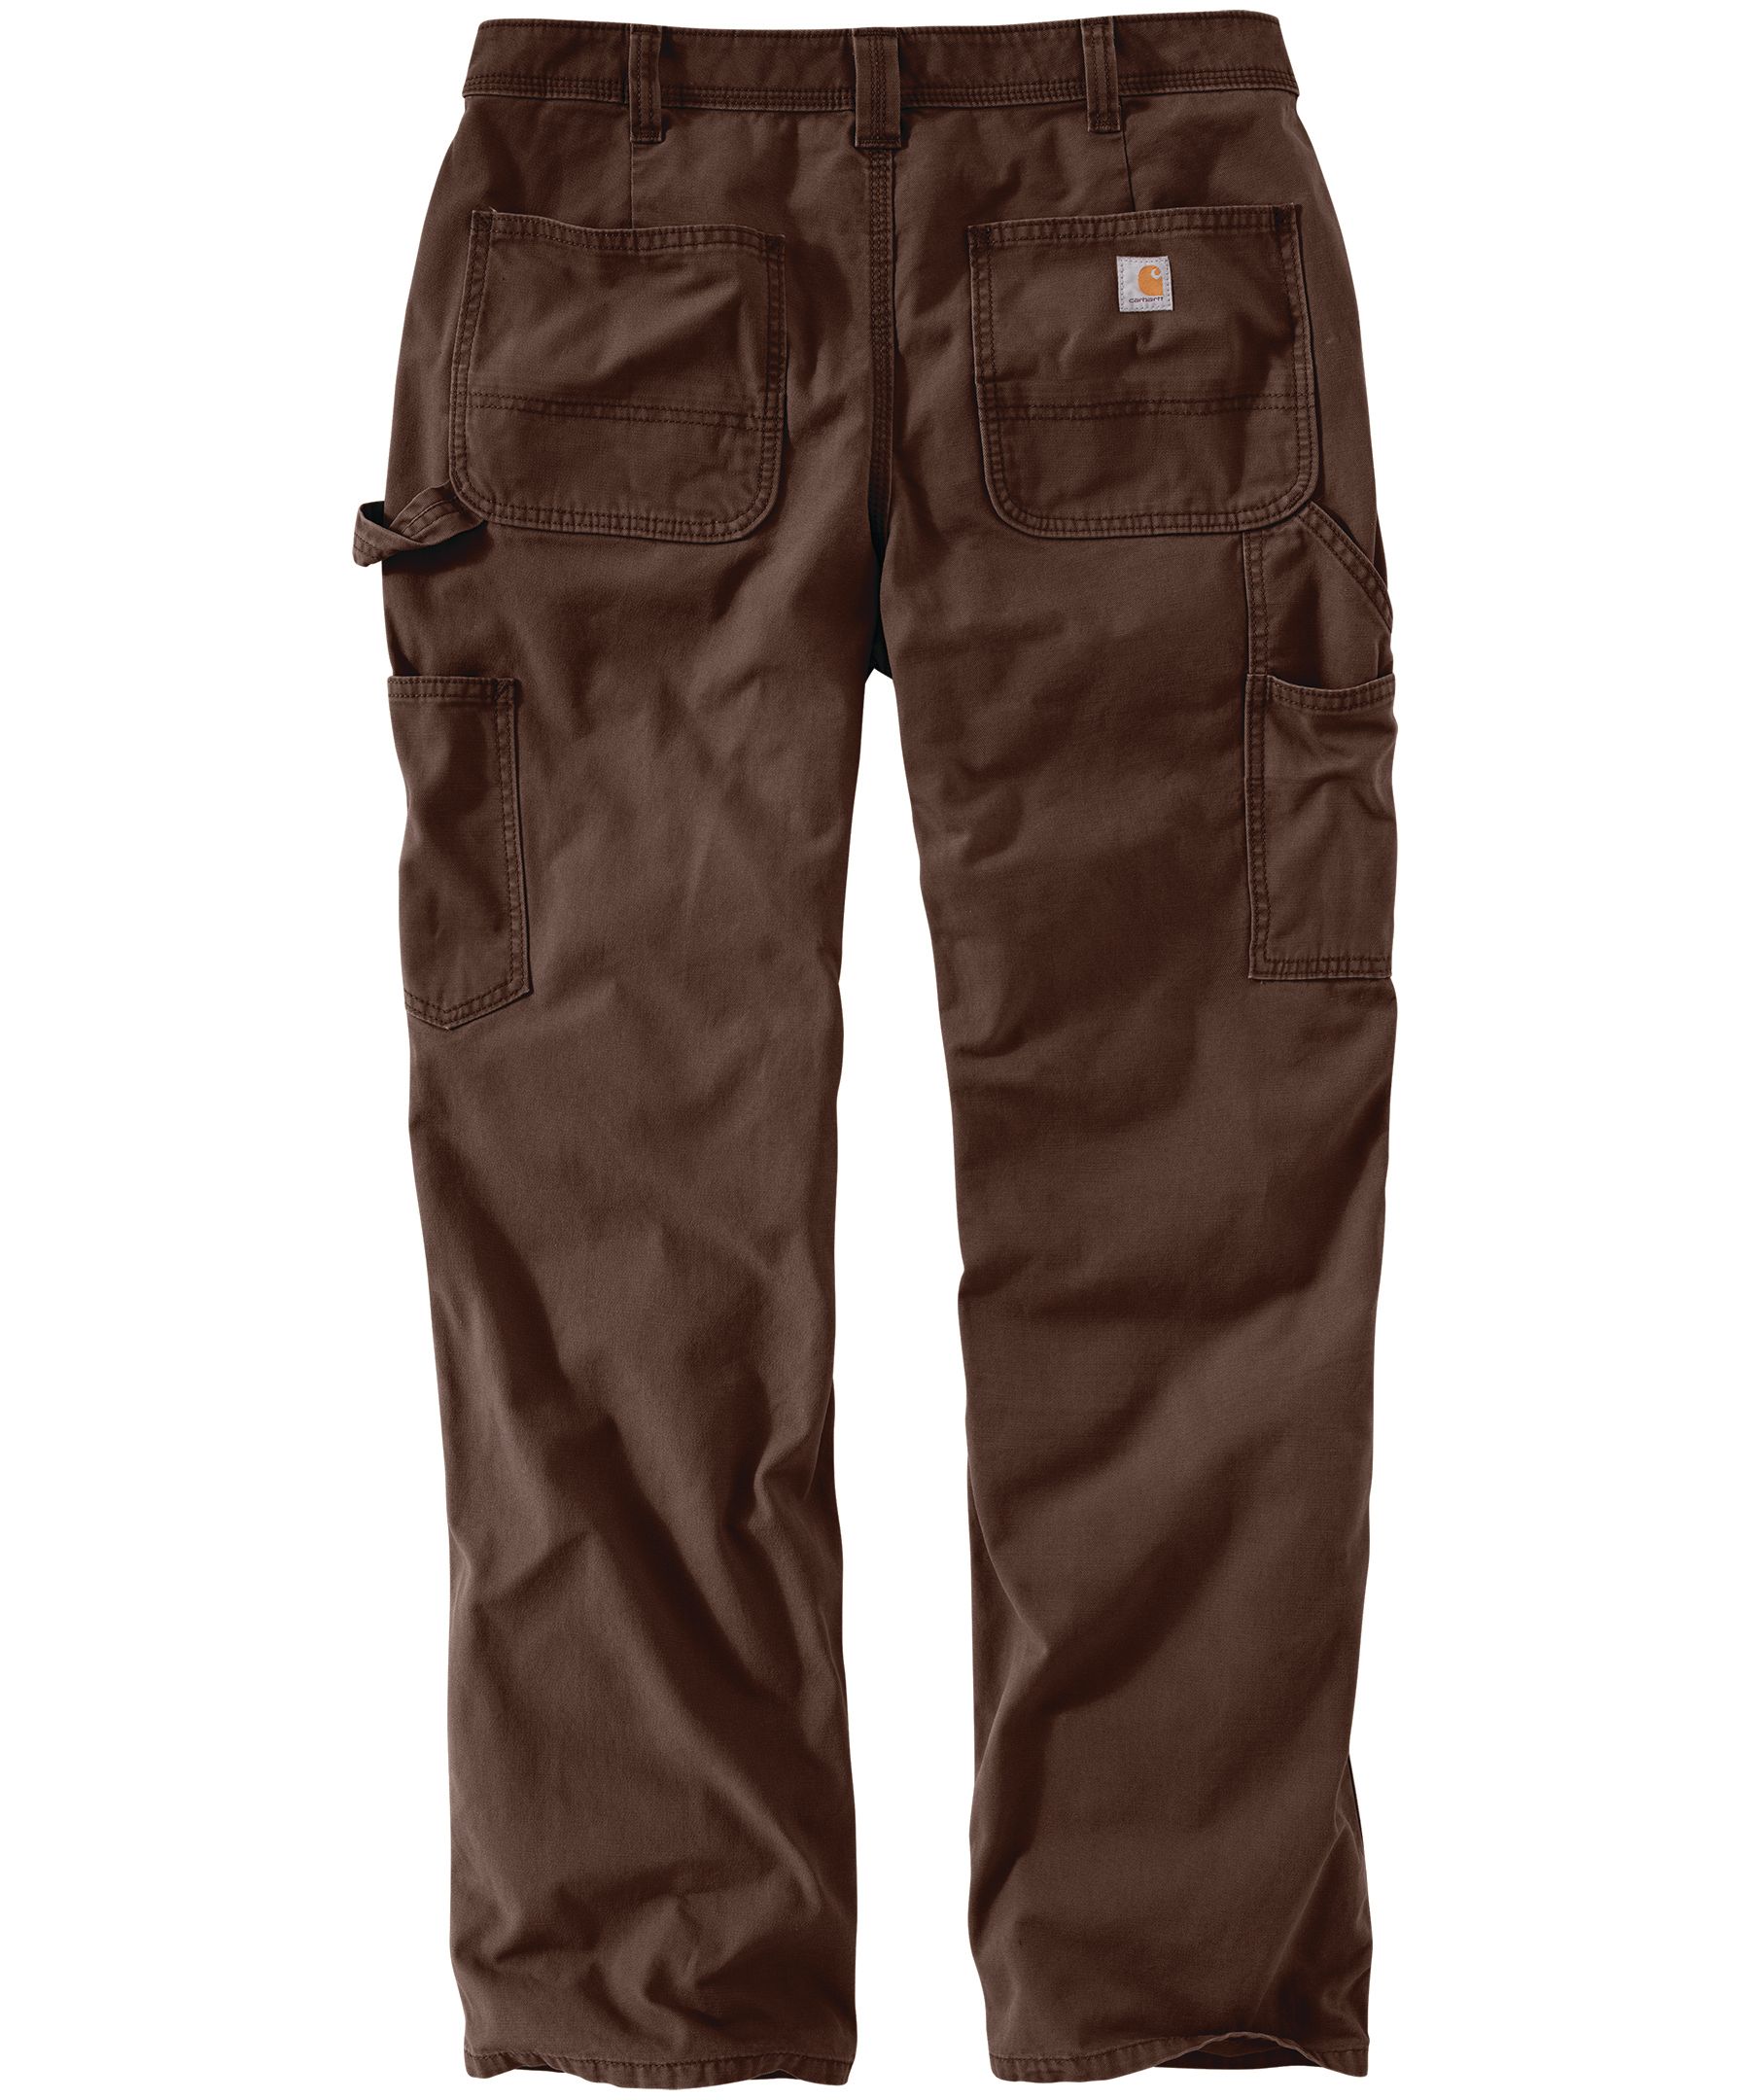 Carhartt Women's Rugged Flex Mid Rise Relaxed Fit Elastic